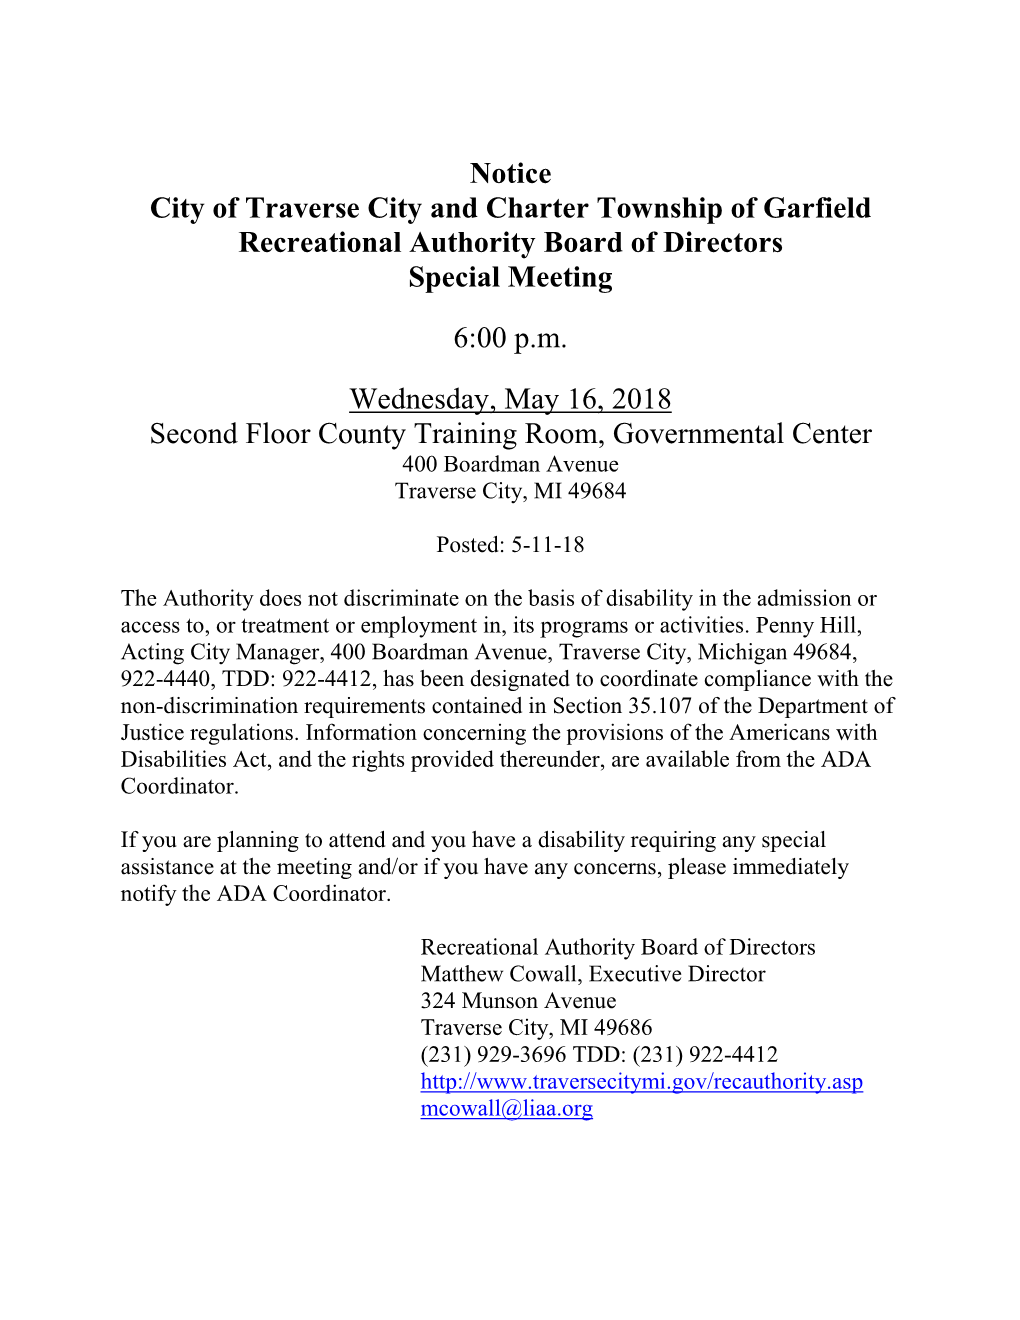 Notice City of Traverse City and Charter Township of Garfield Recreational Authority Board of Directors Special Meeting